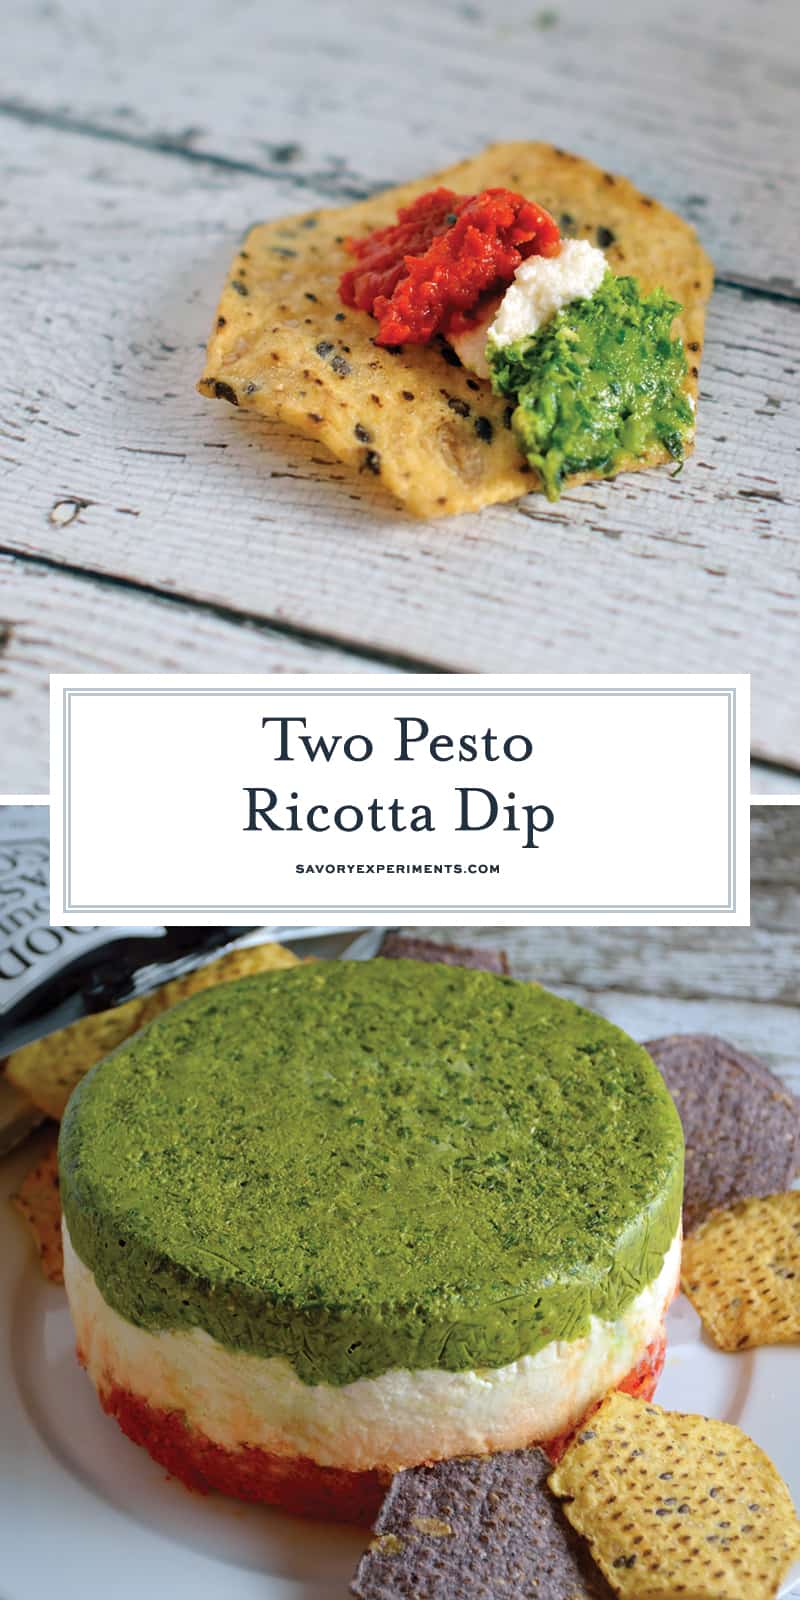 Two Pesto Ricotta Dip combines layers of traditional basil pesto, roasted red pepper and sun dried tomato pesto with ricotta, goat and Parmesan cheese. Chilled in a mold, it is a beautiful red, green and white! #pestodip #ricottadip www.savoryexperiments.com